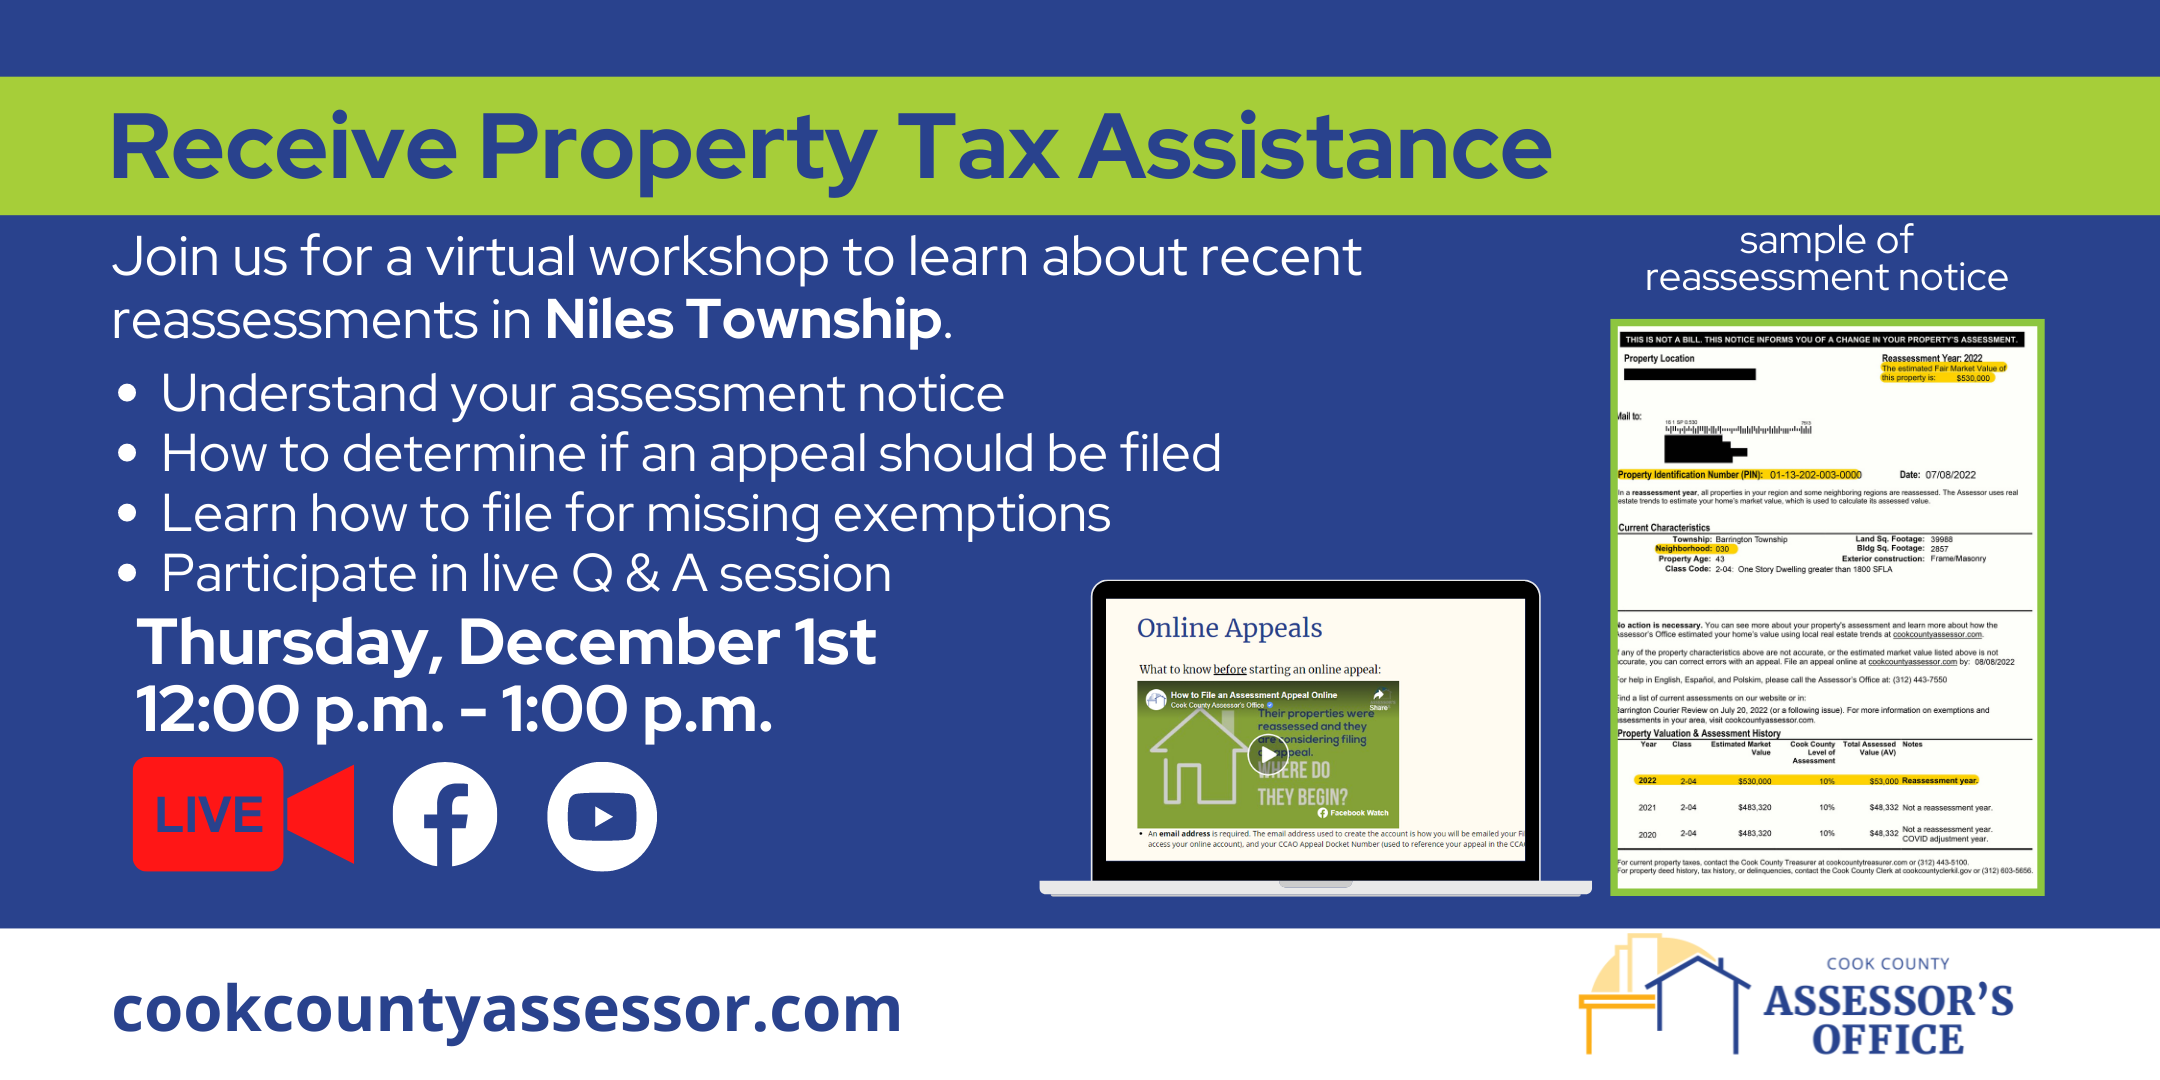 property tax assistance appeal workshop niles township december 1 2022